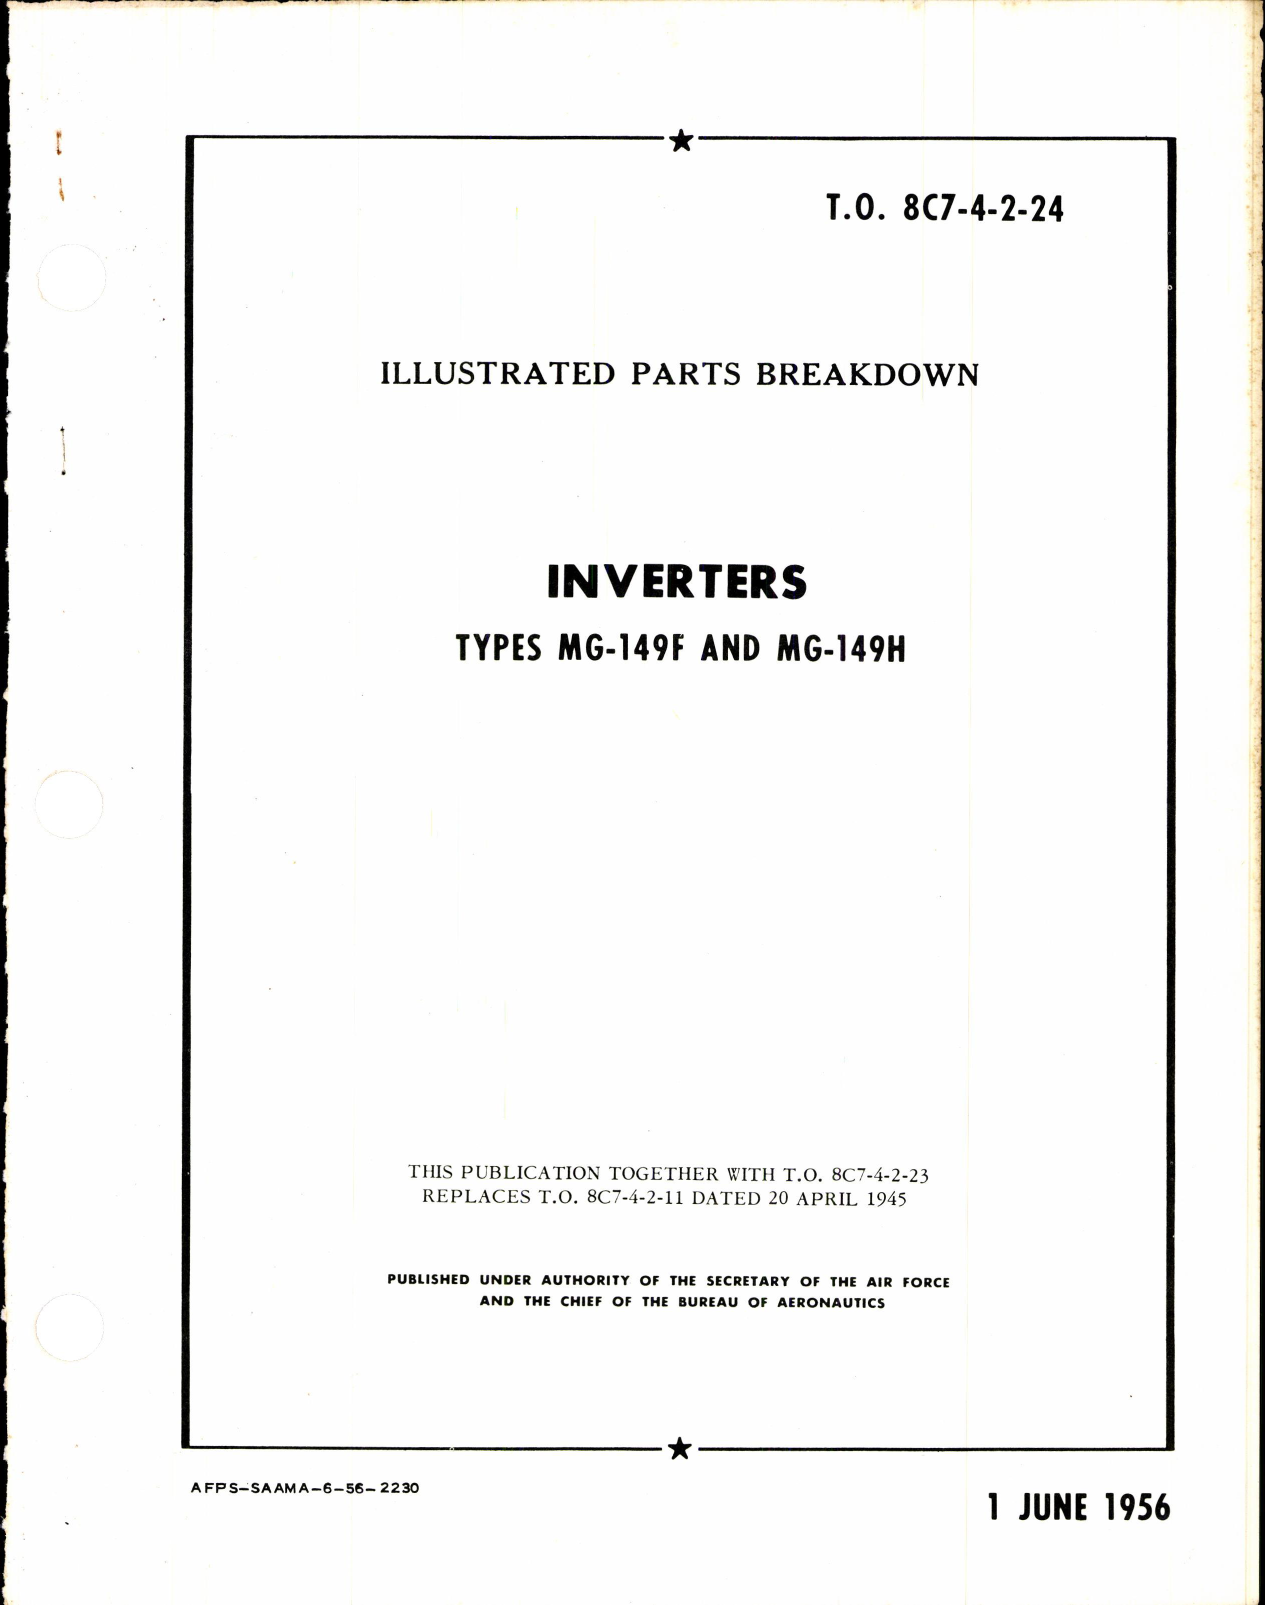 Sample page 1 from AirCorps Library document: Parts Breakdown for Inverters Types MG-149F & MG-149H